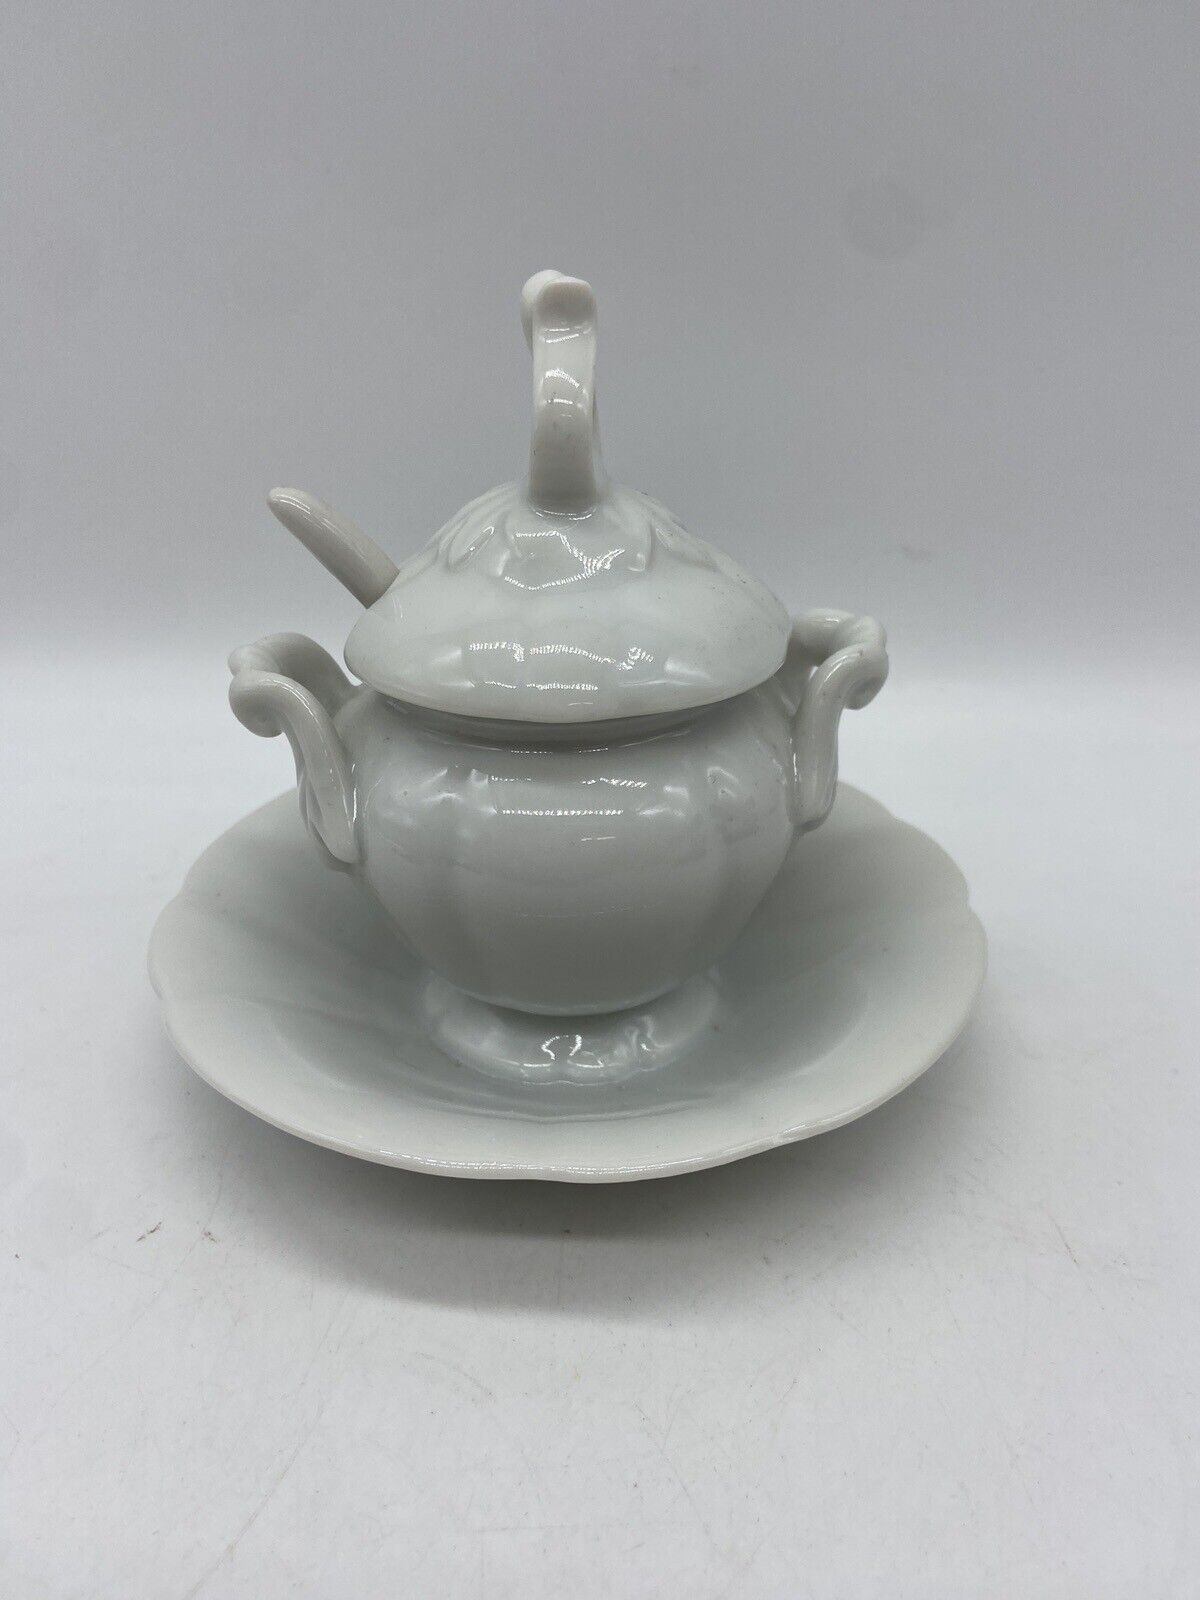 Vintage White Renaldy’s Japan Sugar Bowl W/Lid & Spoon -Attached Underplate